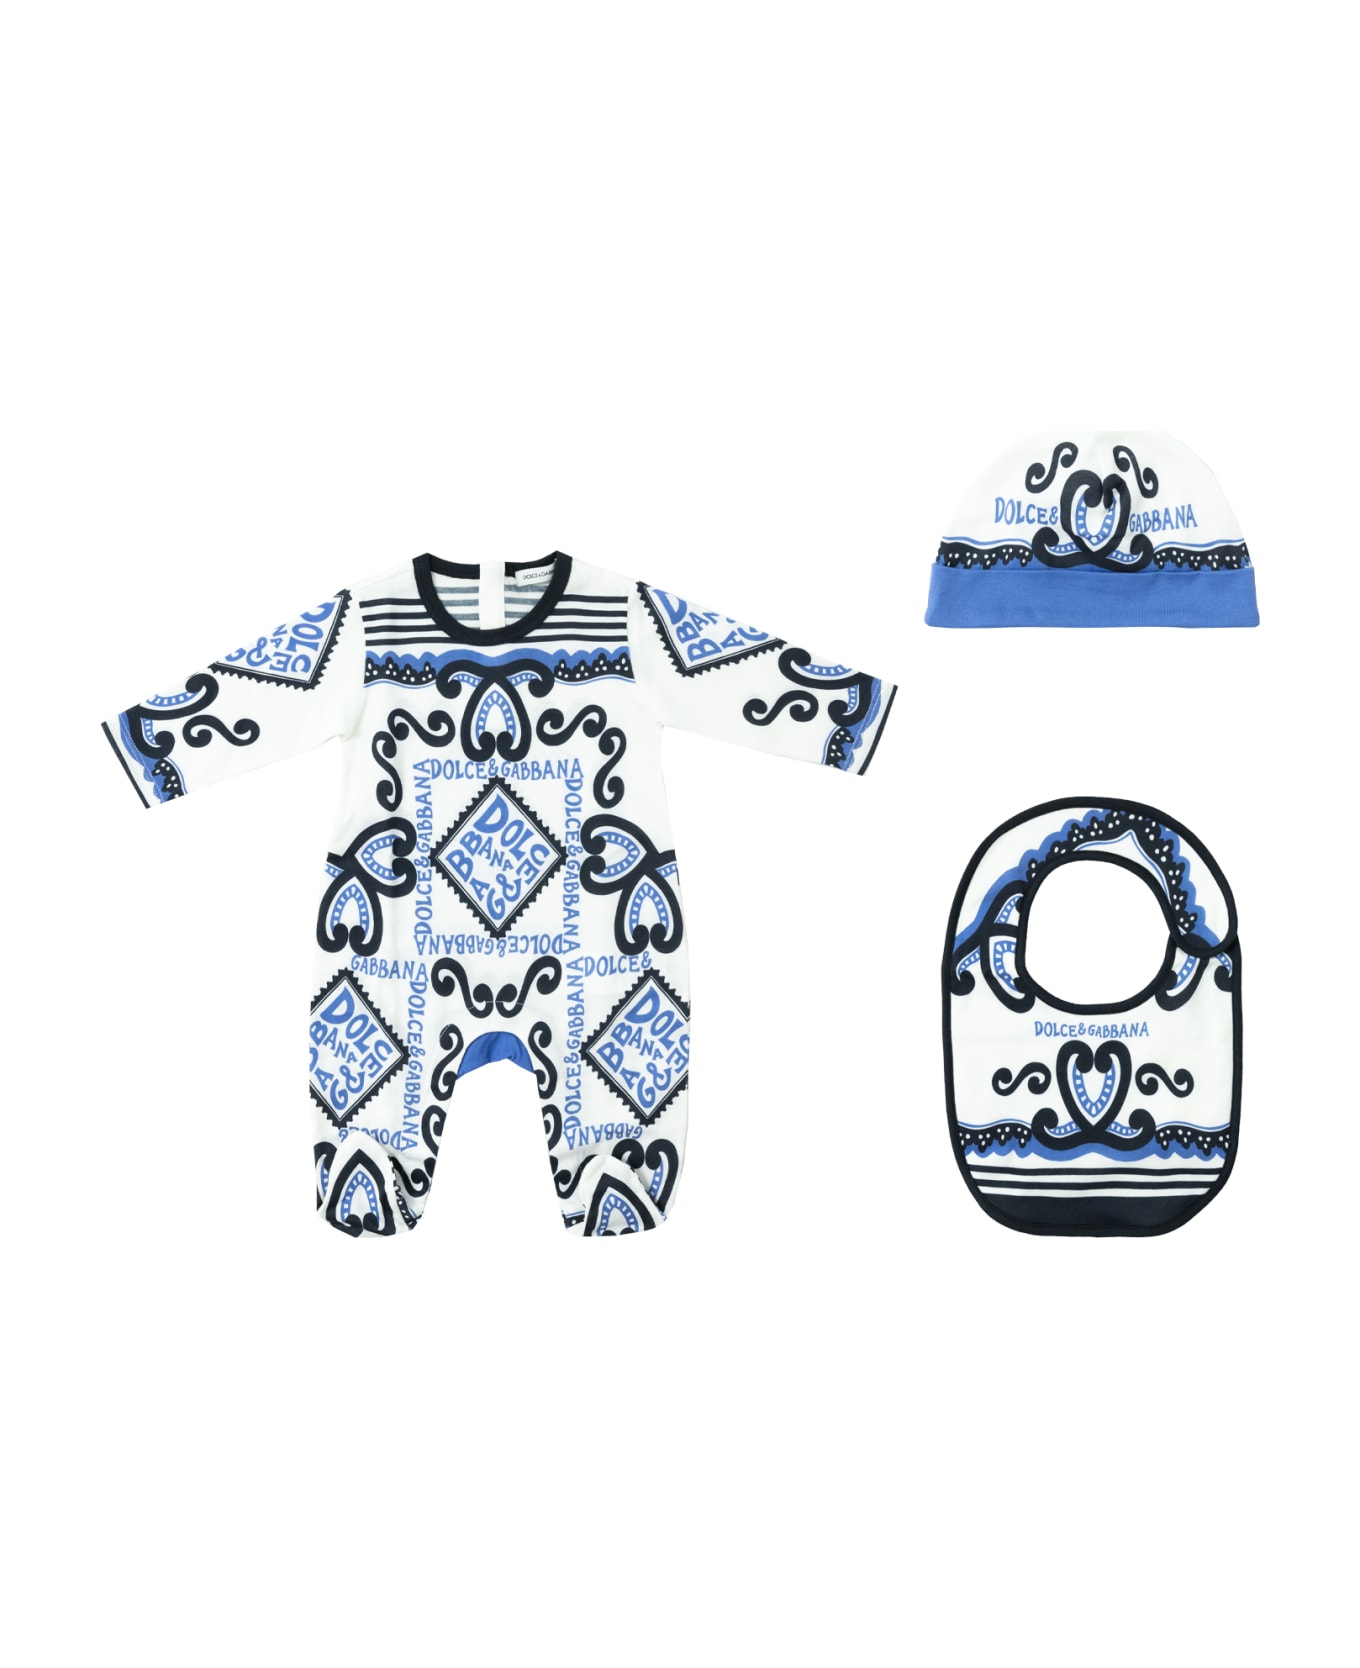 Dolce & Gabbana 3-piece Gift Set With Marine Print - Multicolor アクセサリー＆ギフト